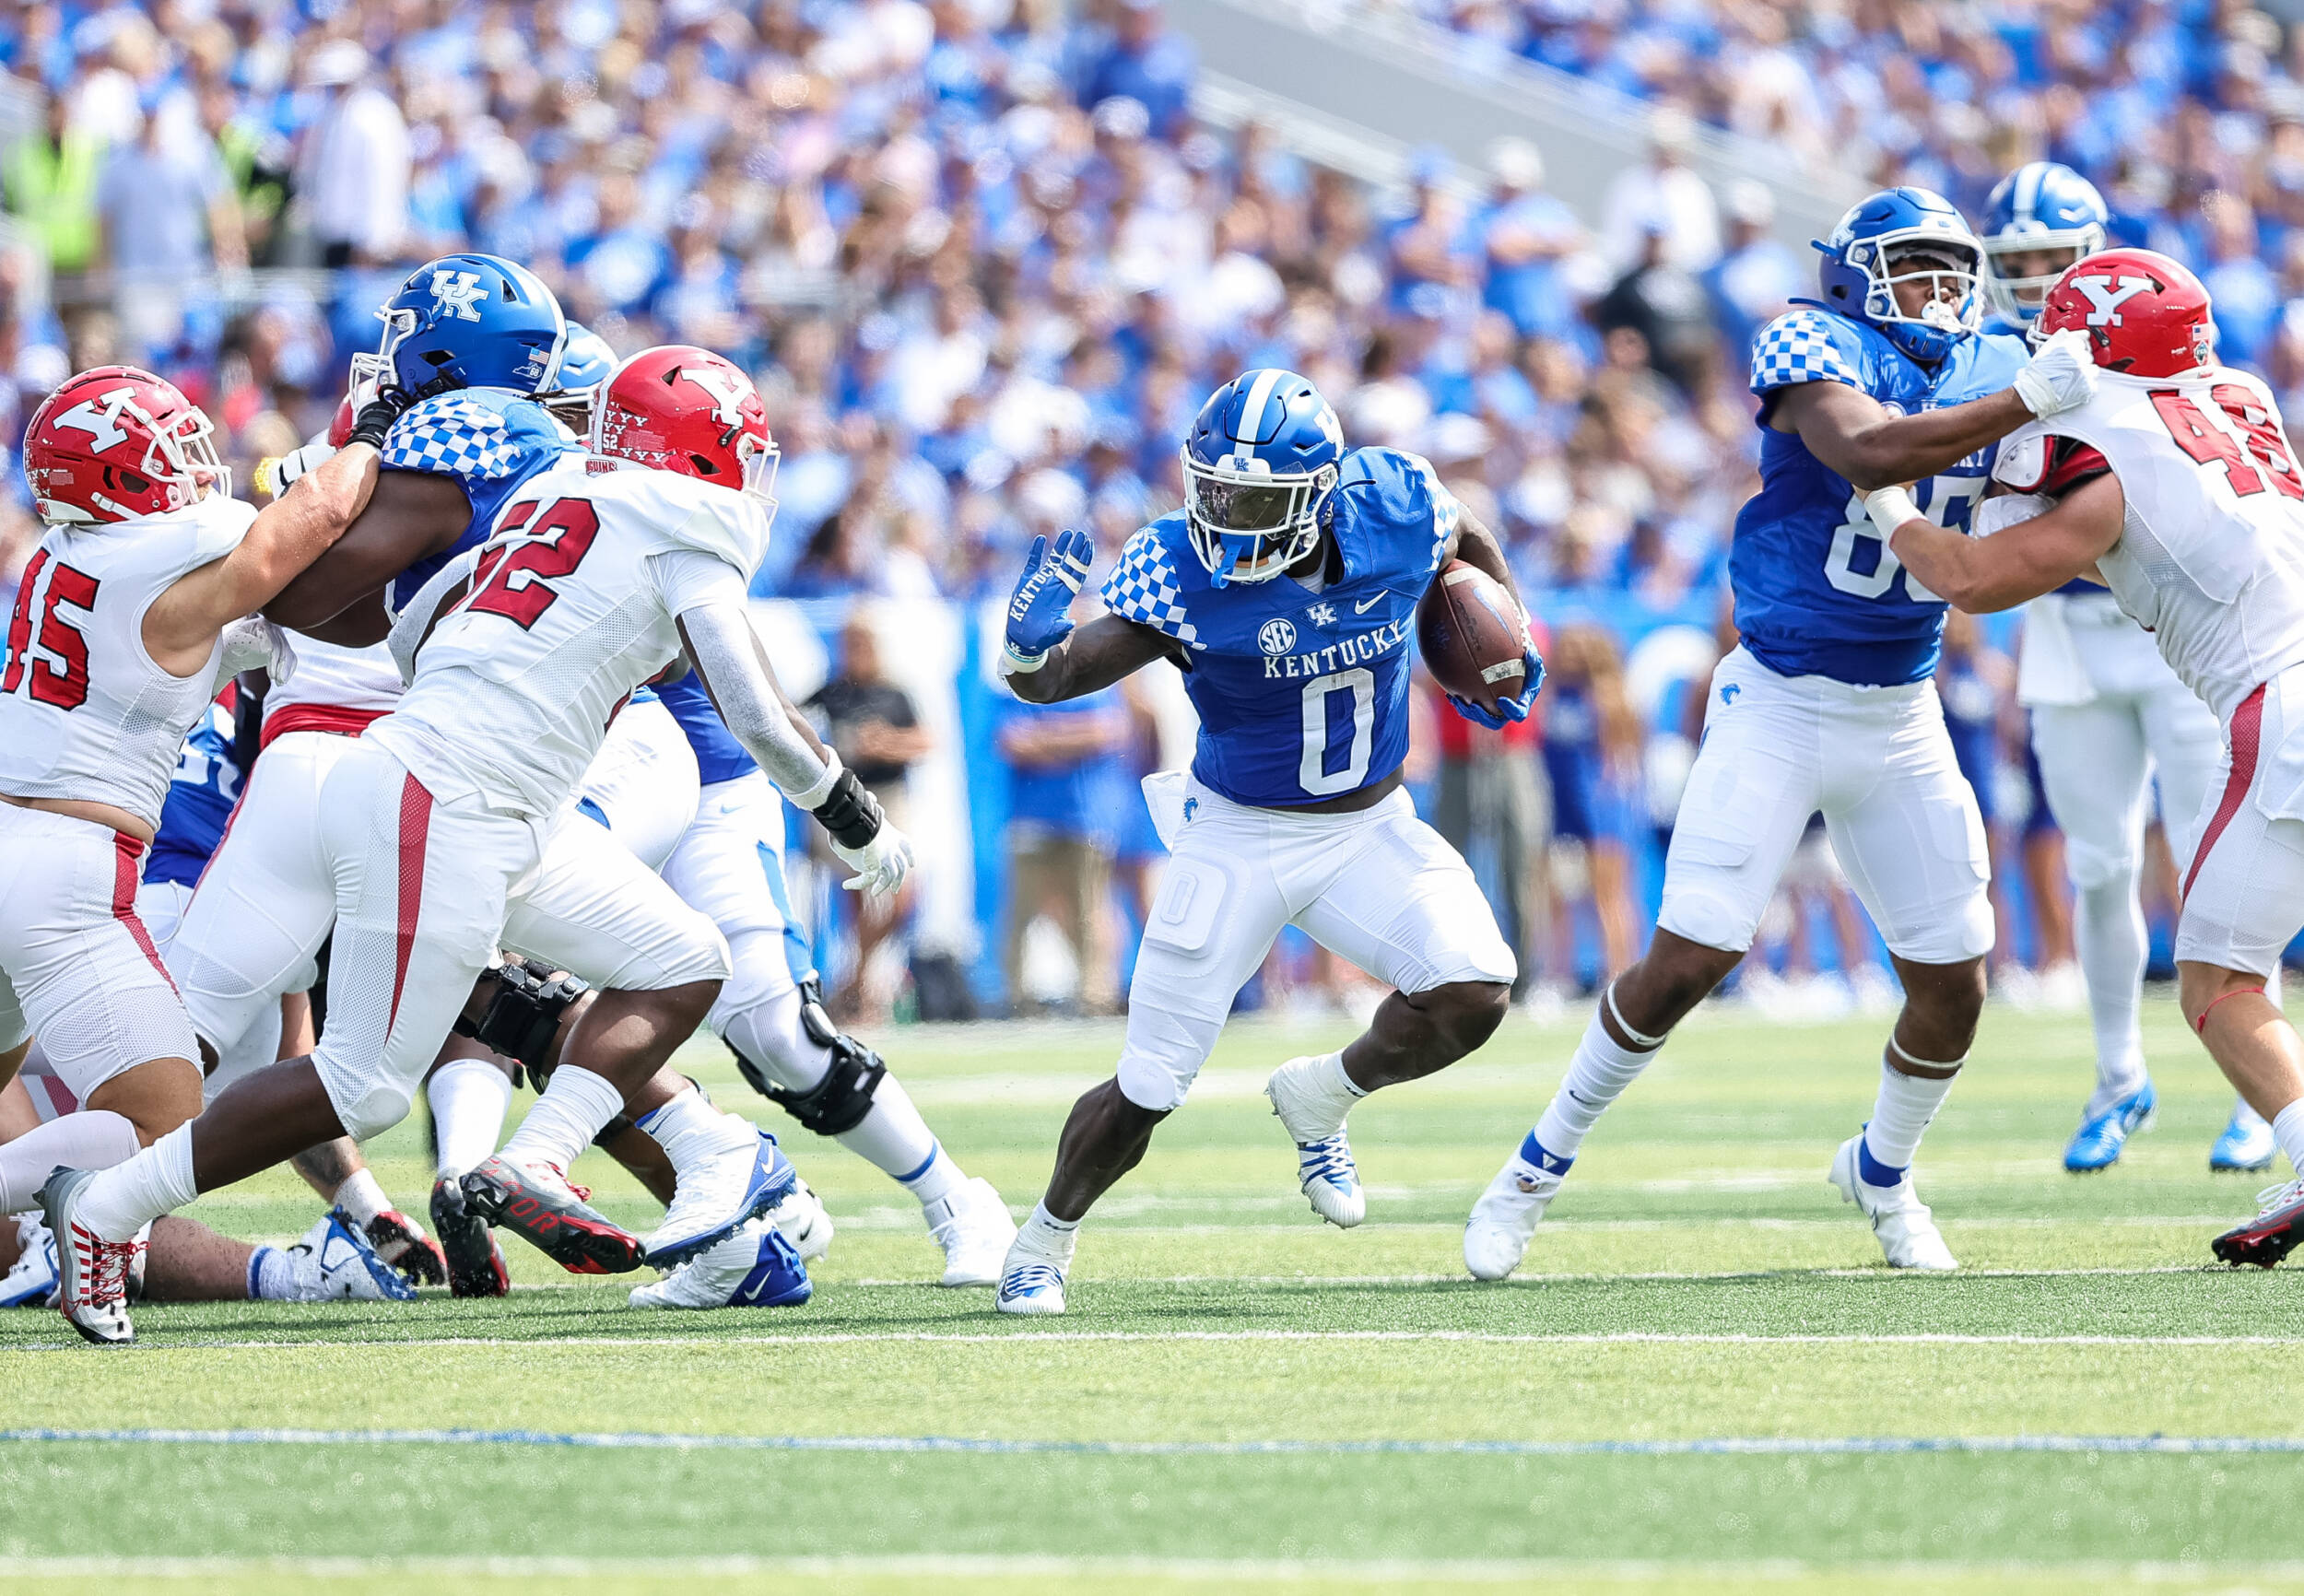 Game Day Central: Kentucky vs. Youngstown State